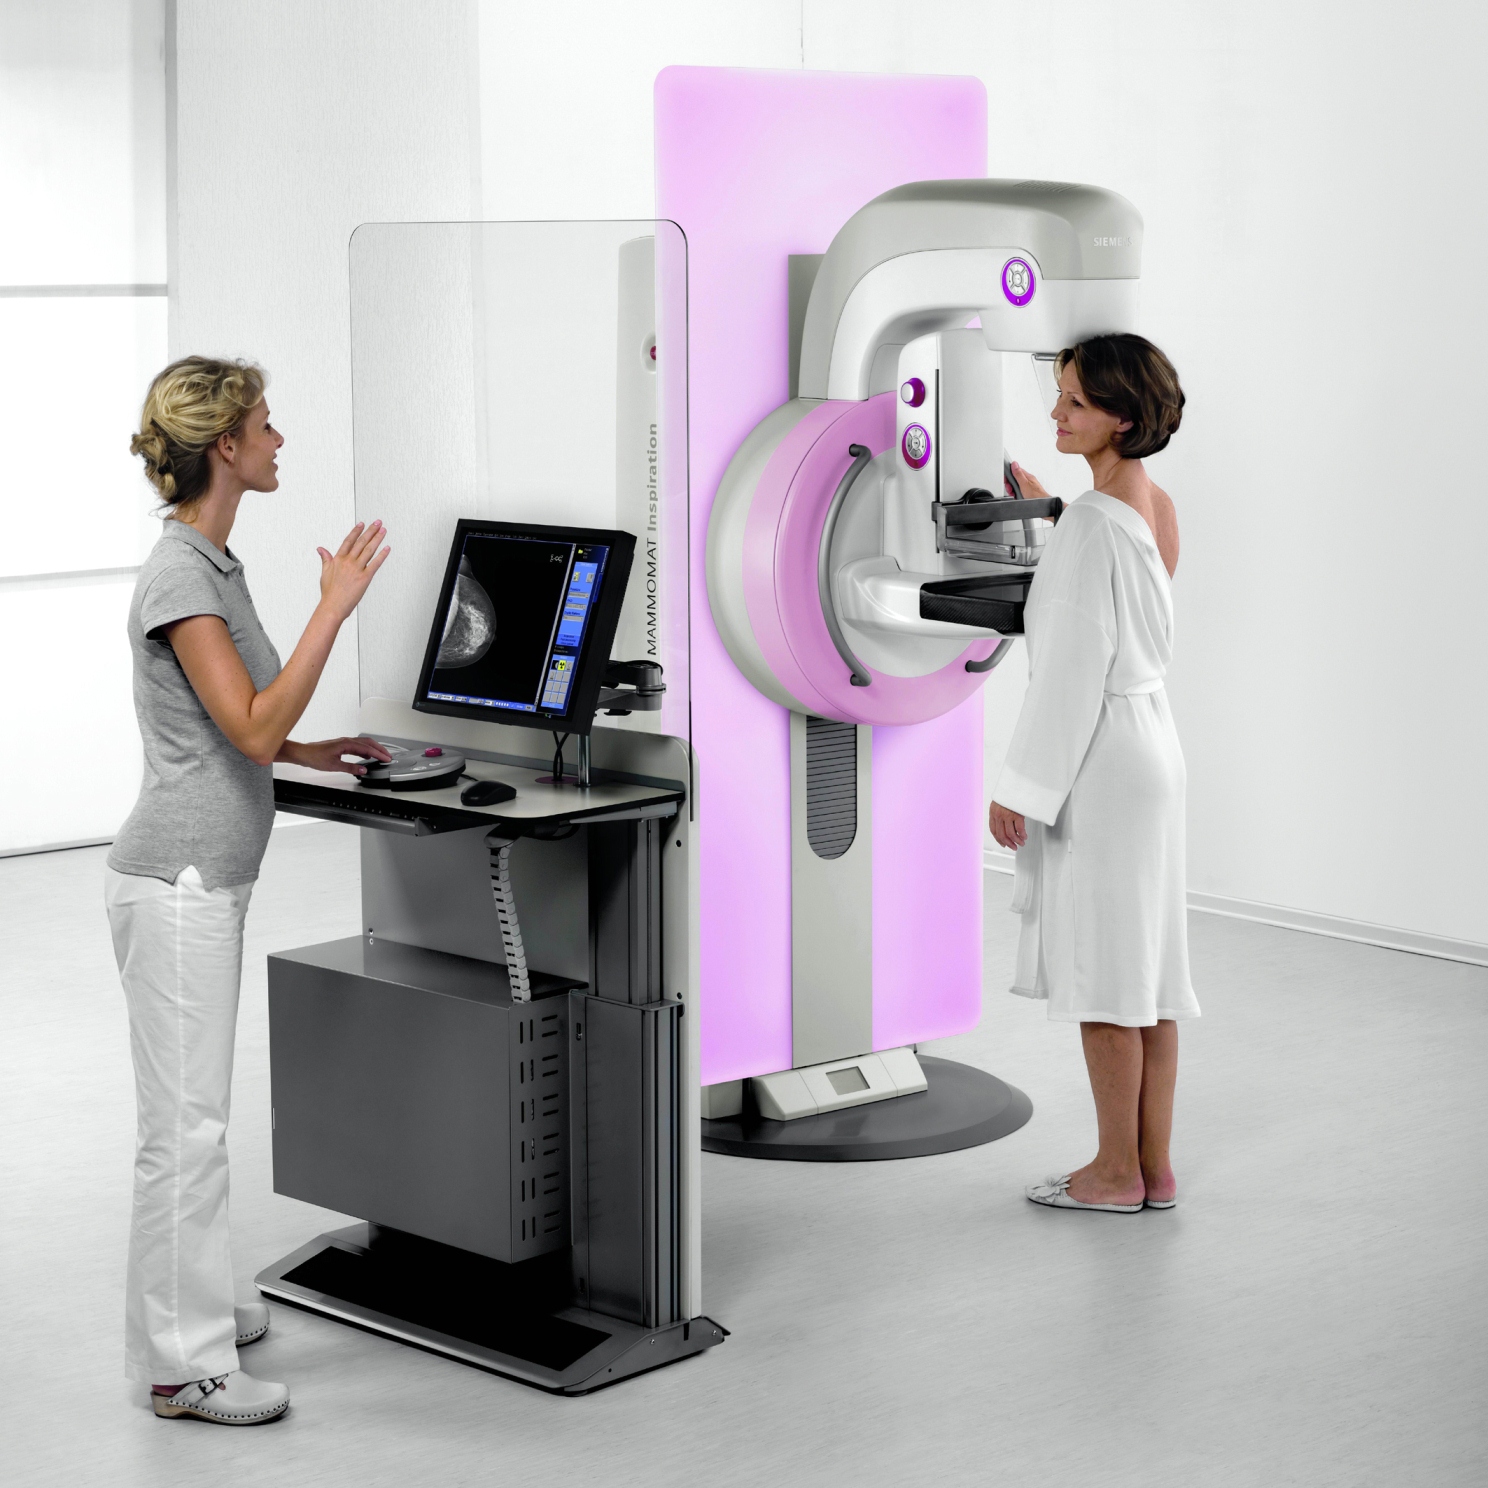 Lowering Radiation in Mammography Treatment